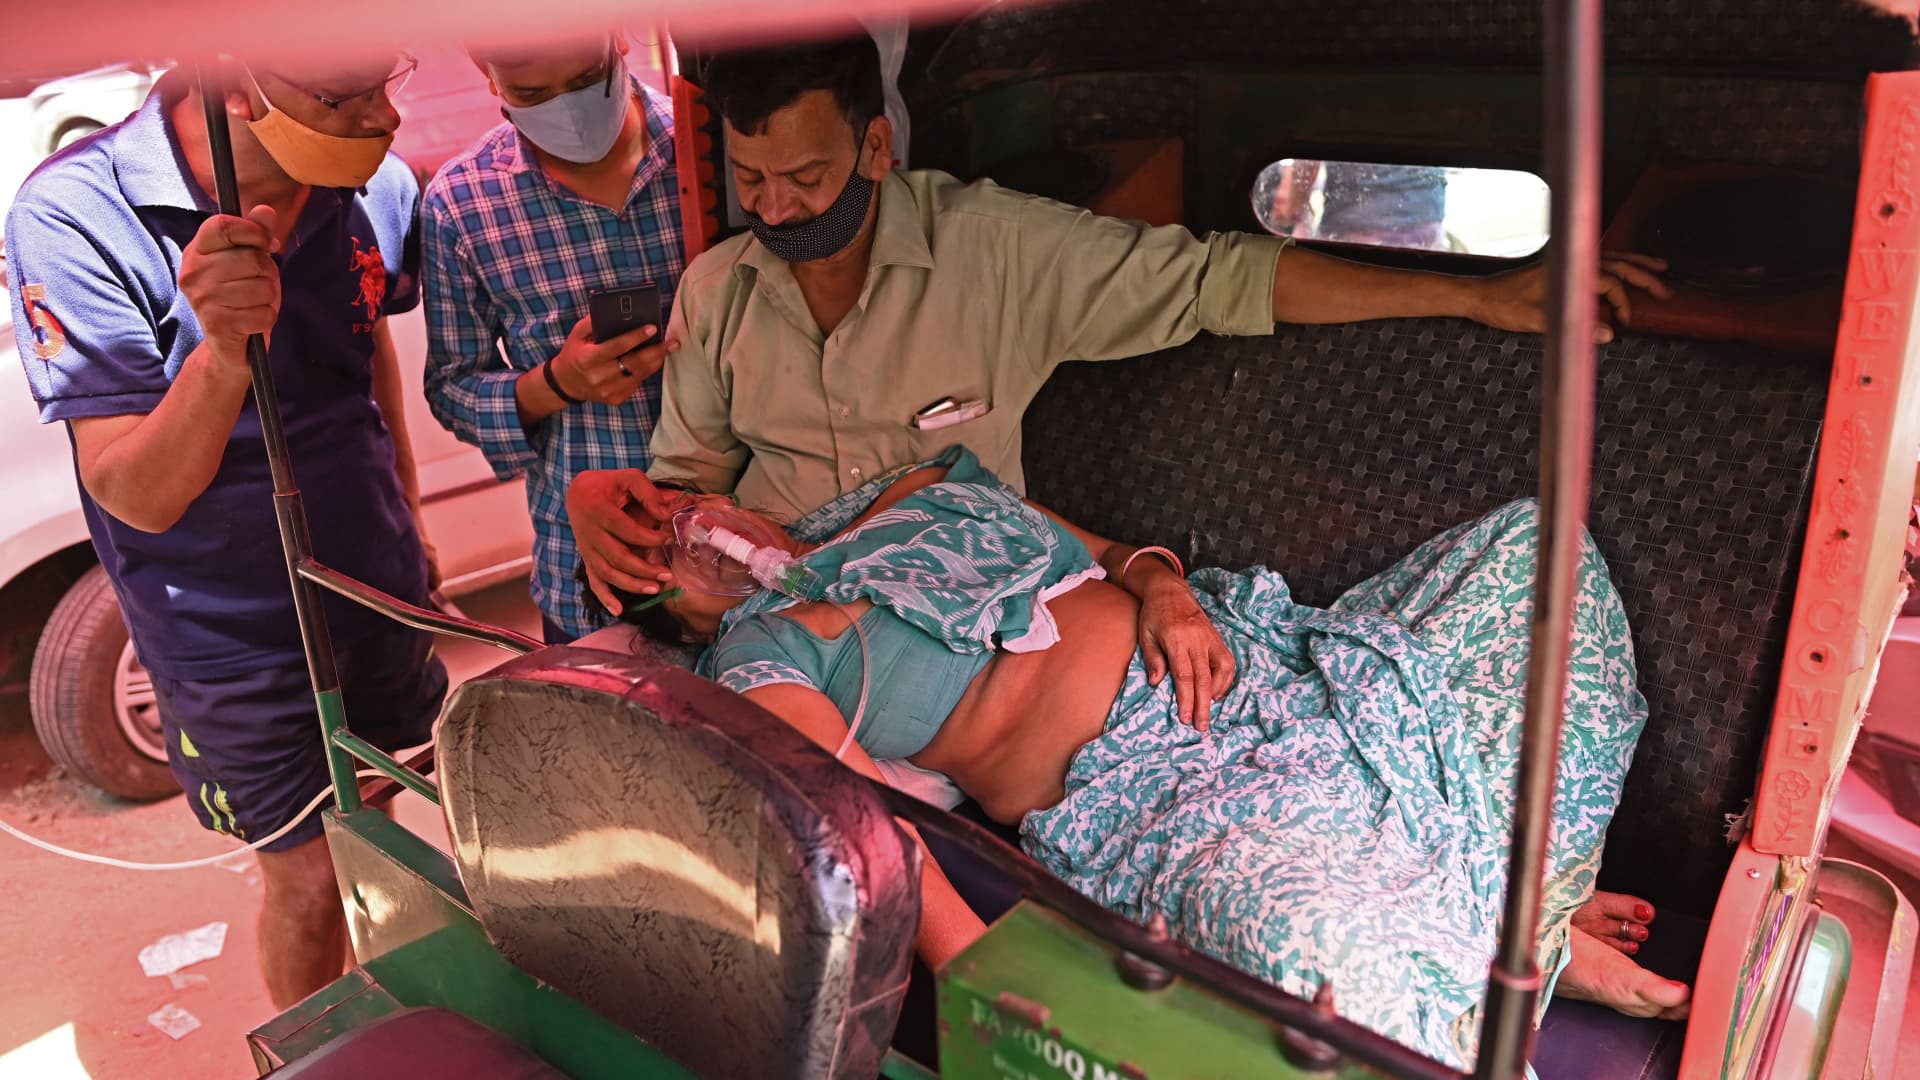 A patient breathes with the help of oxygen provided by a Gurdwara, a place of worship for Sikhs, inside an auto rickshaw parked under a tent along the roadside amid Covid-19 coronavirus pandemic in Ghaziabad on April 26, 2021.